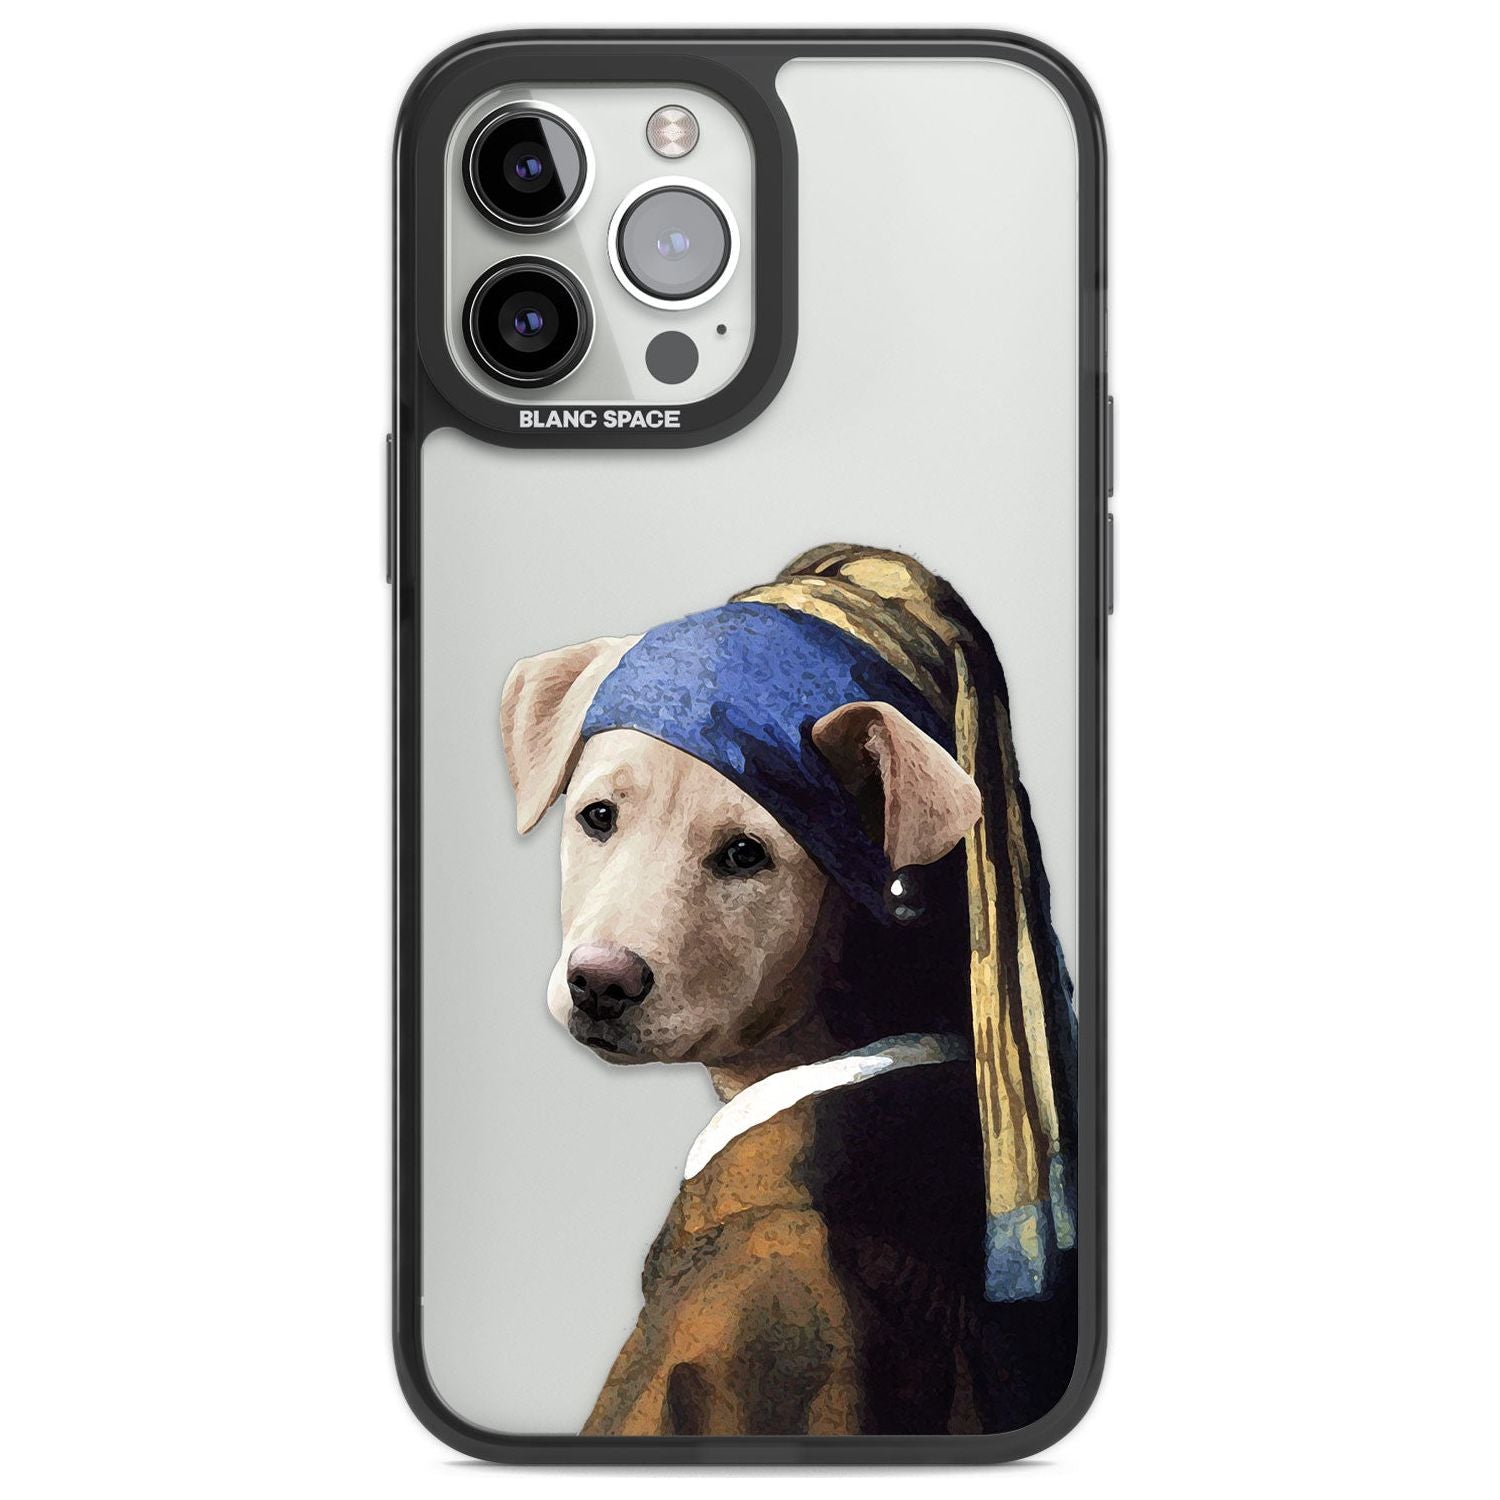 The BarkPhone Case for iPhone 14 Pro Max